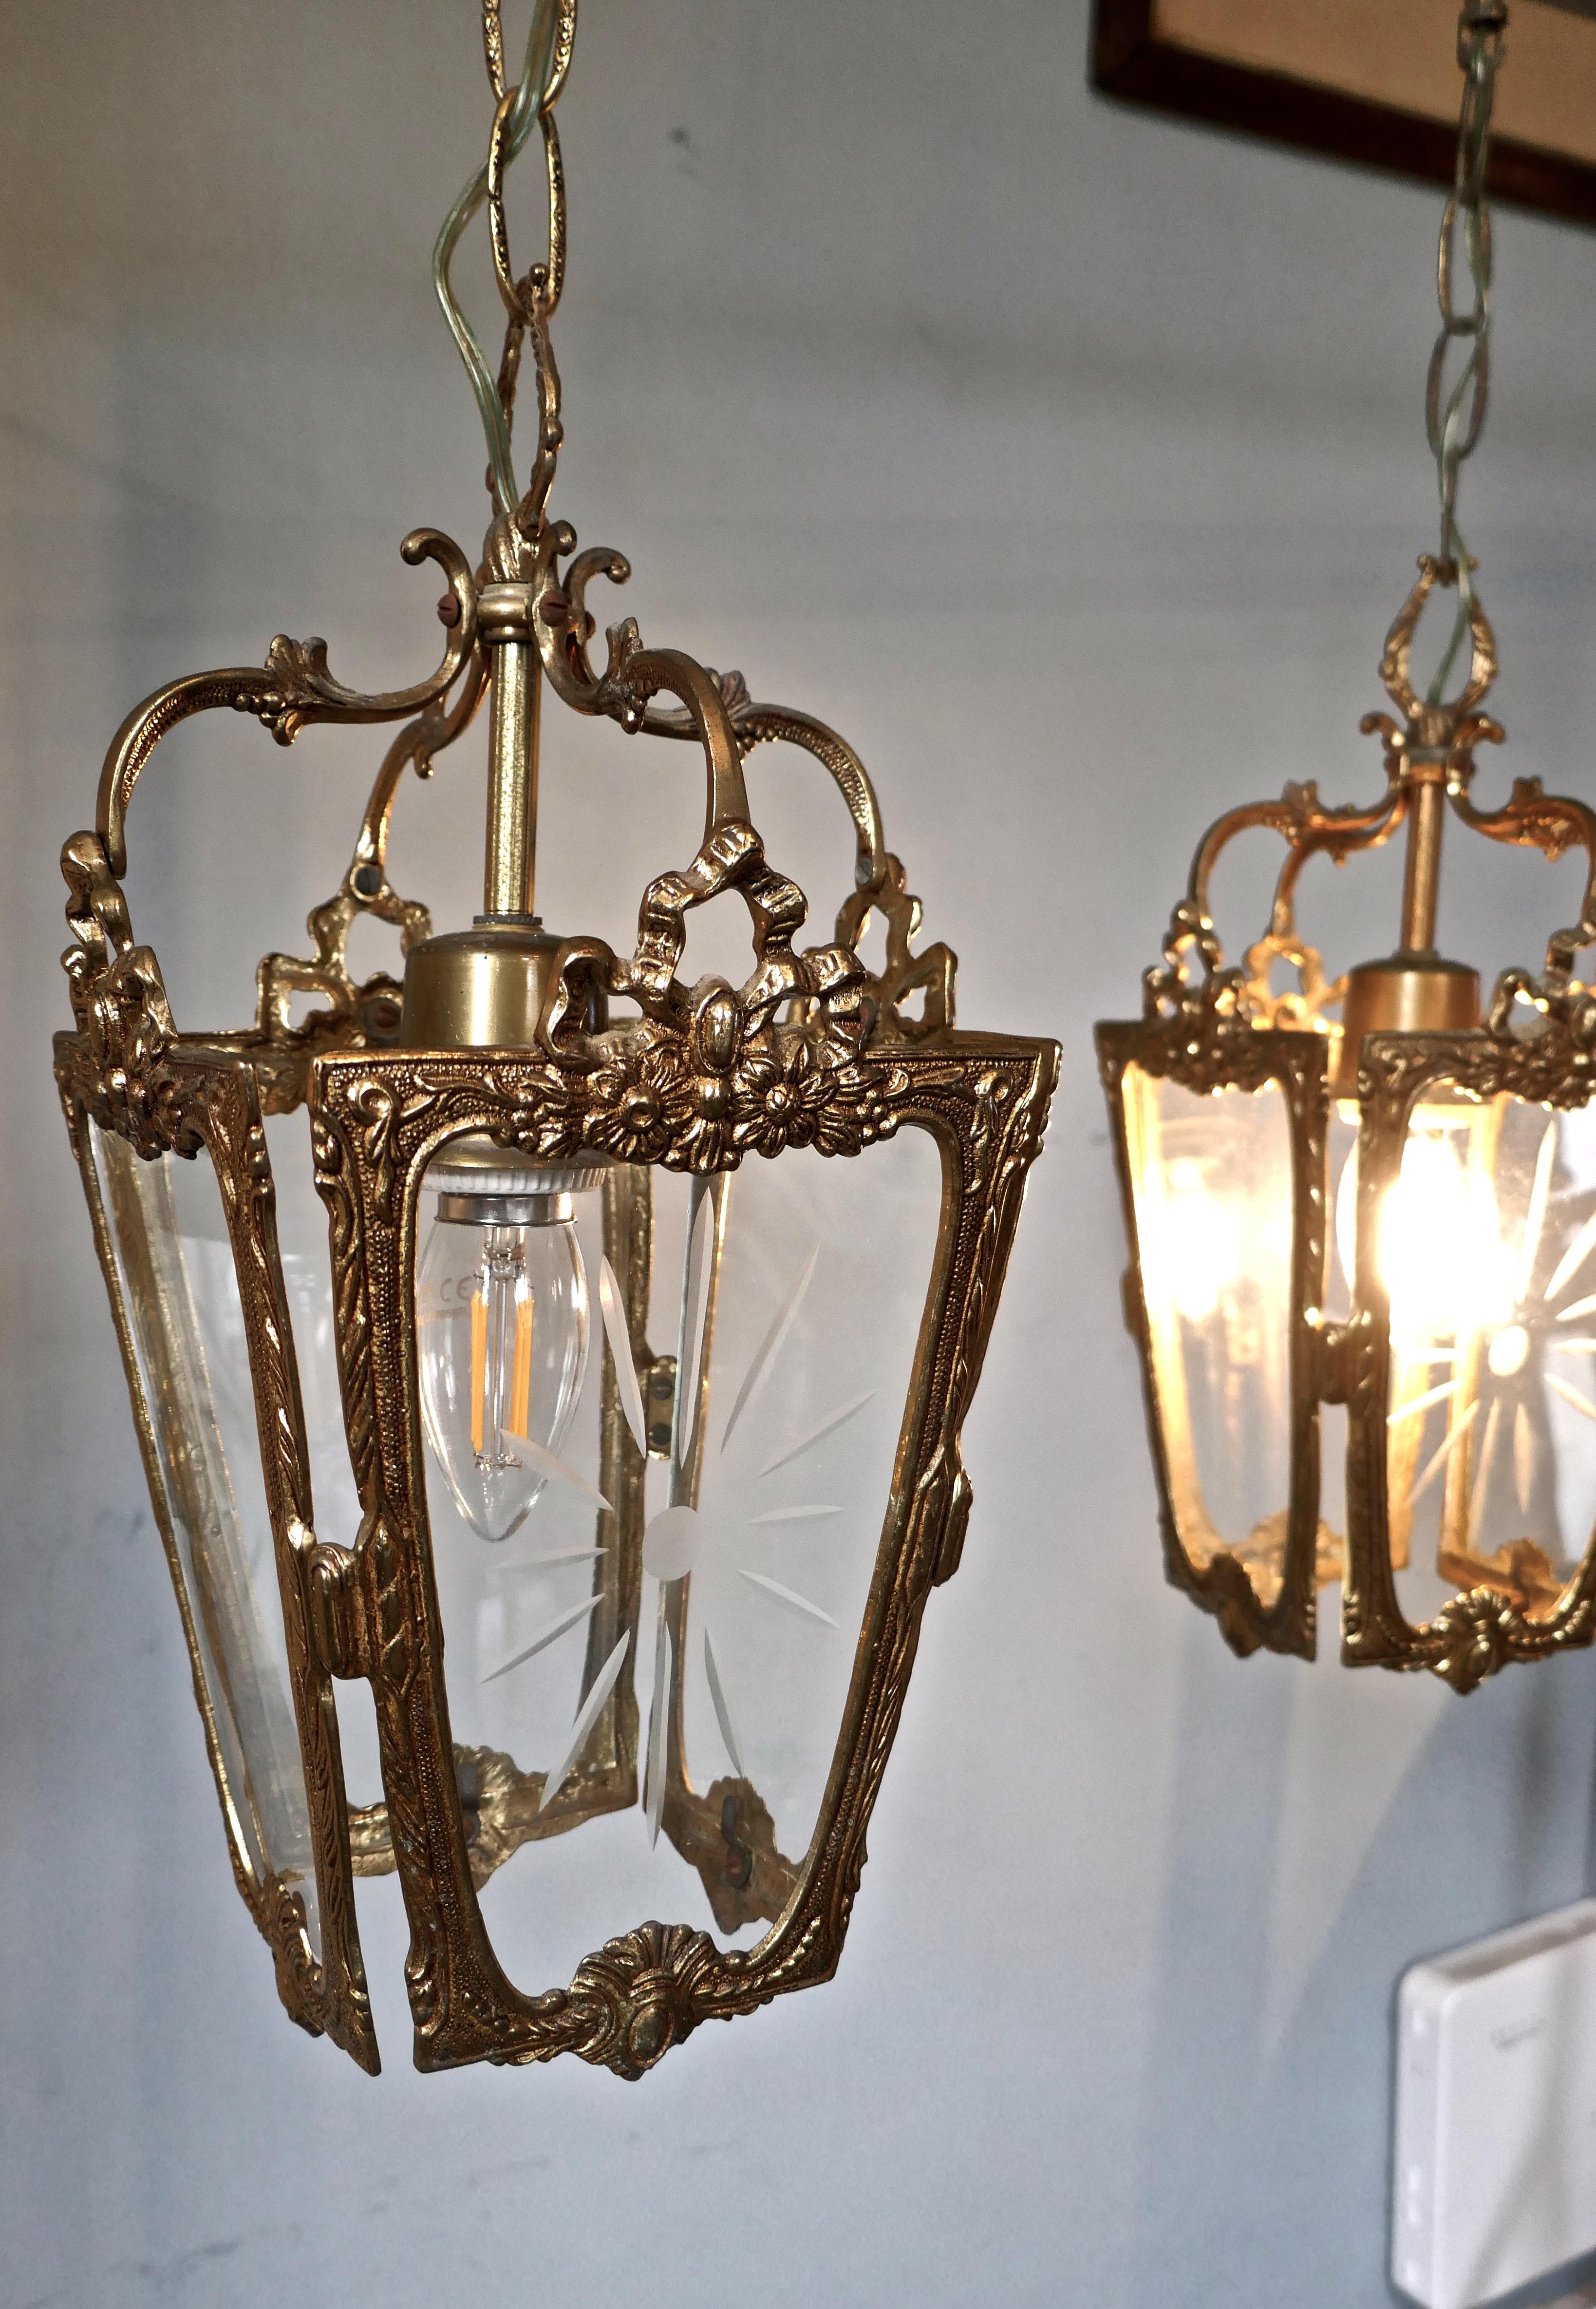 19th Century Pair of Superb Quality French Rocco Brass and Etched Glass Lantern Hall Light